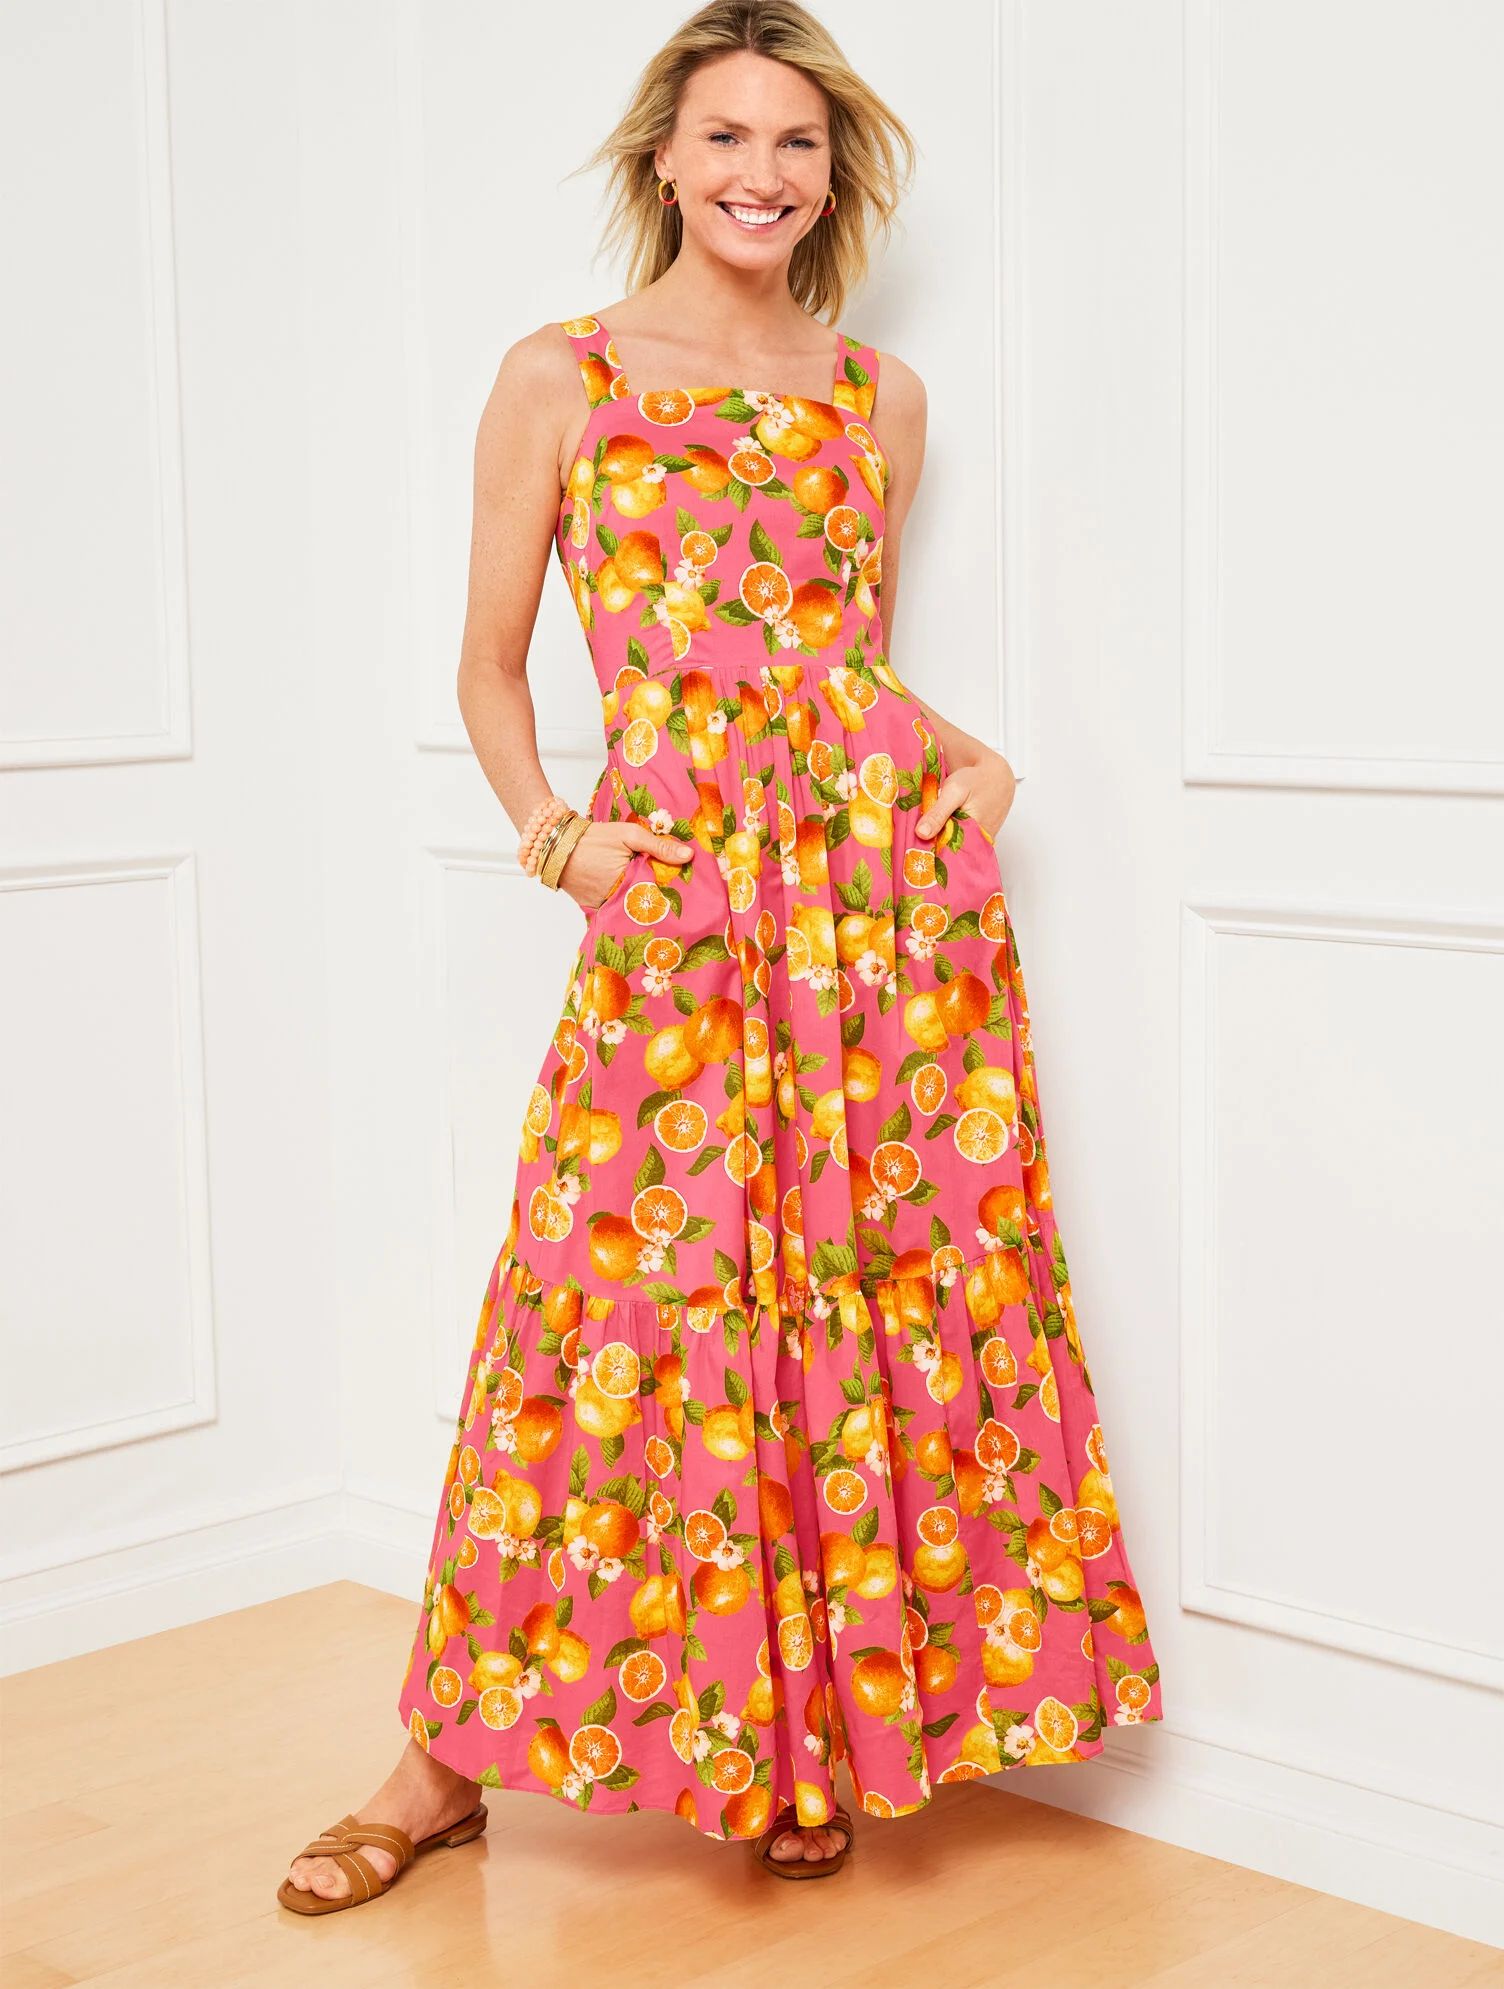 Tiered Maxi Dress - Lemons and Oranges | Talbots